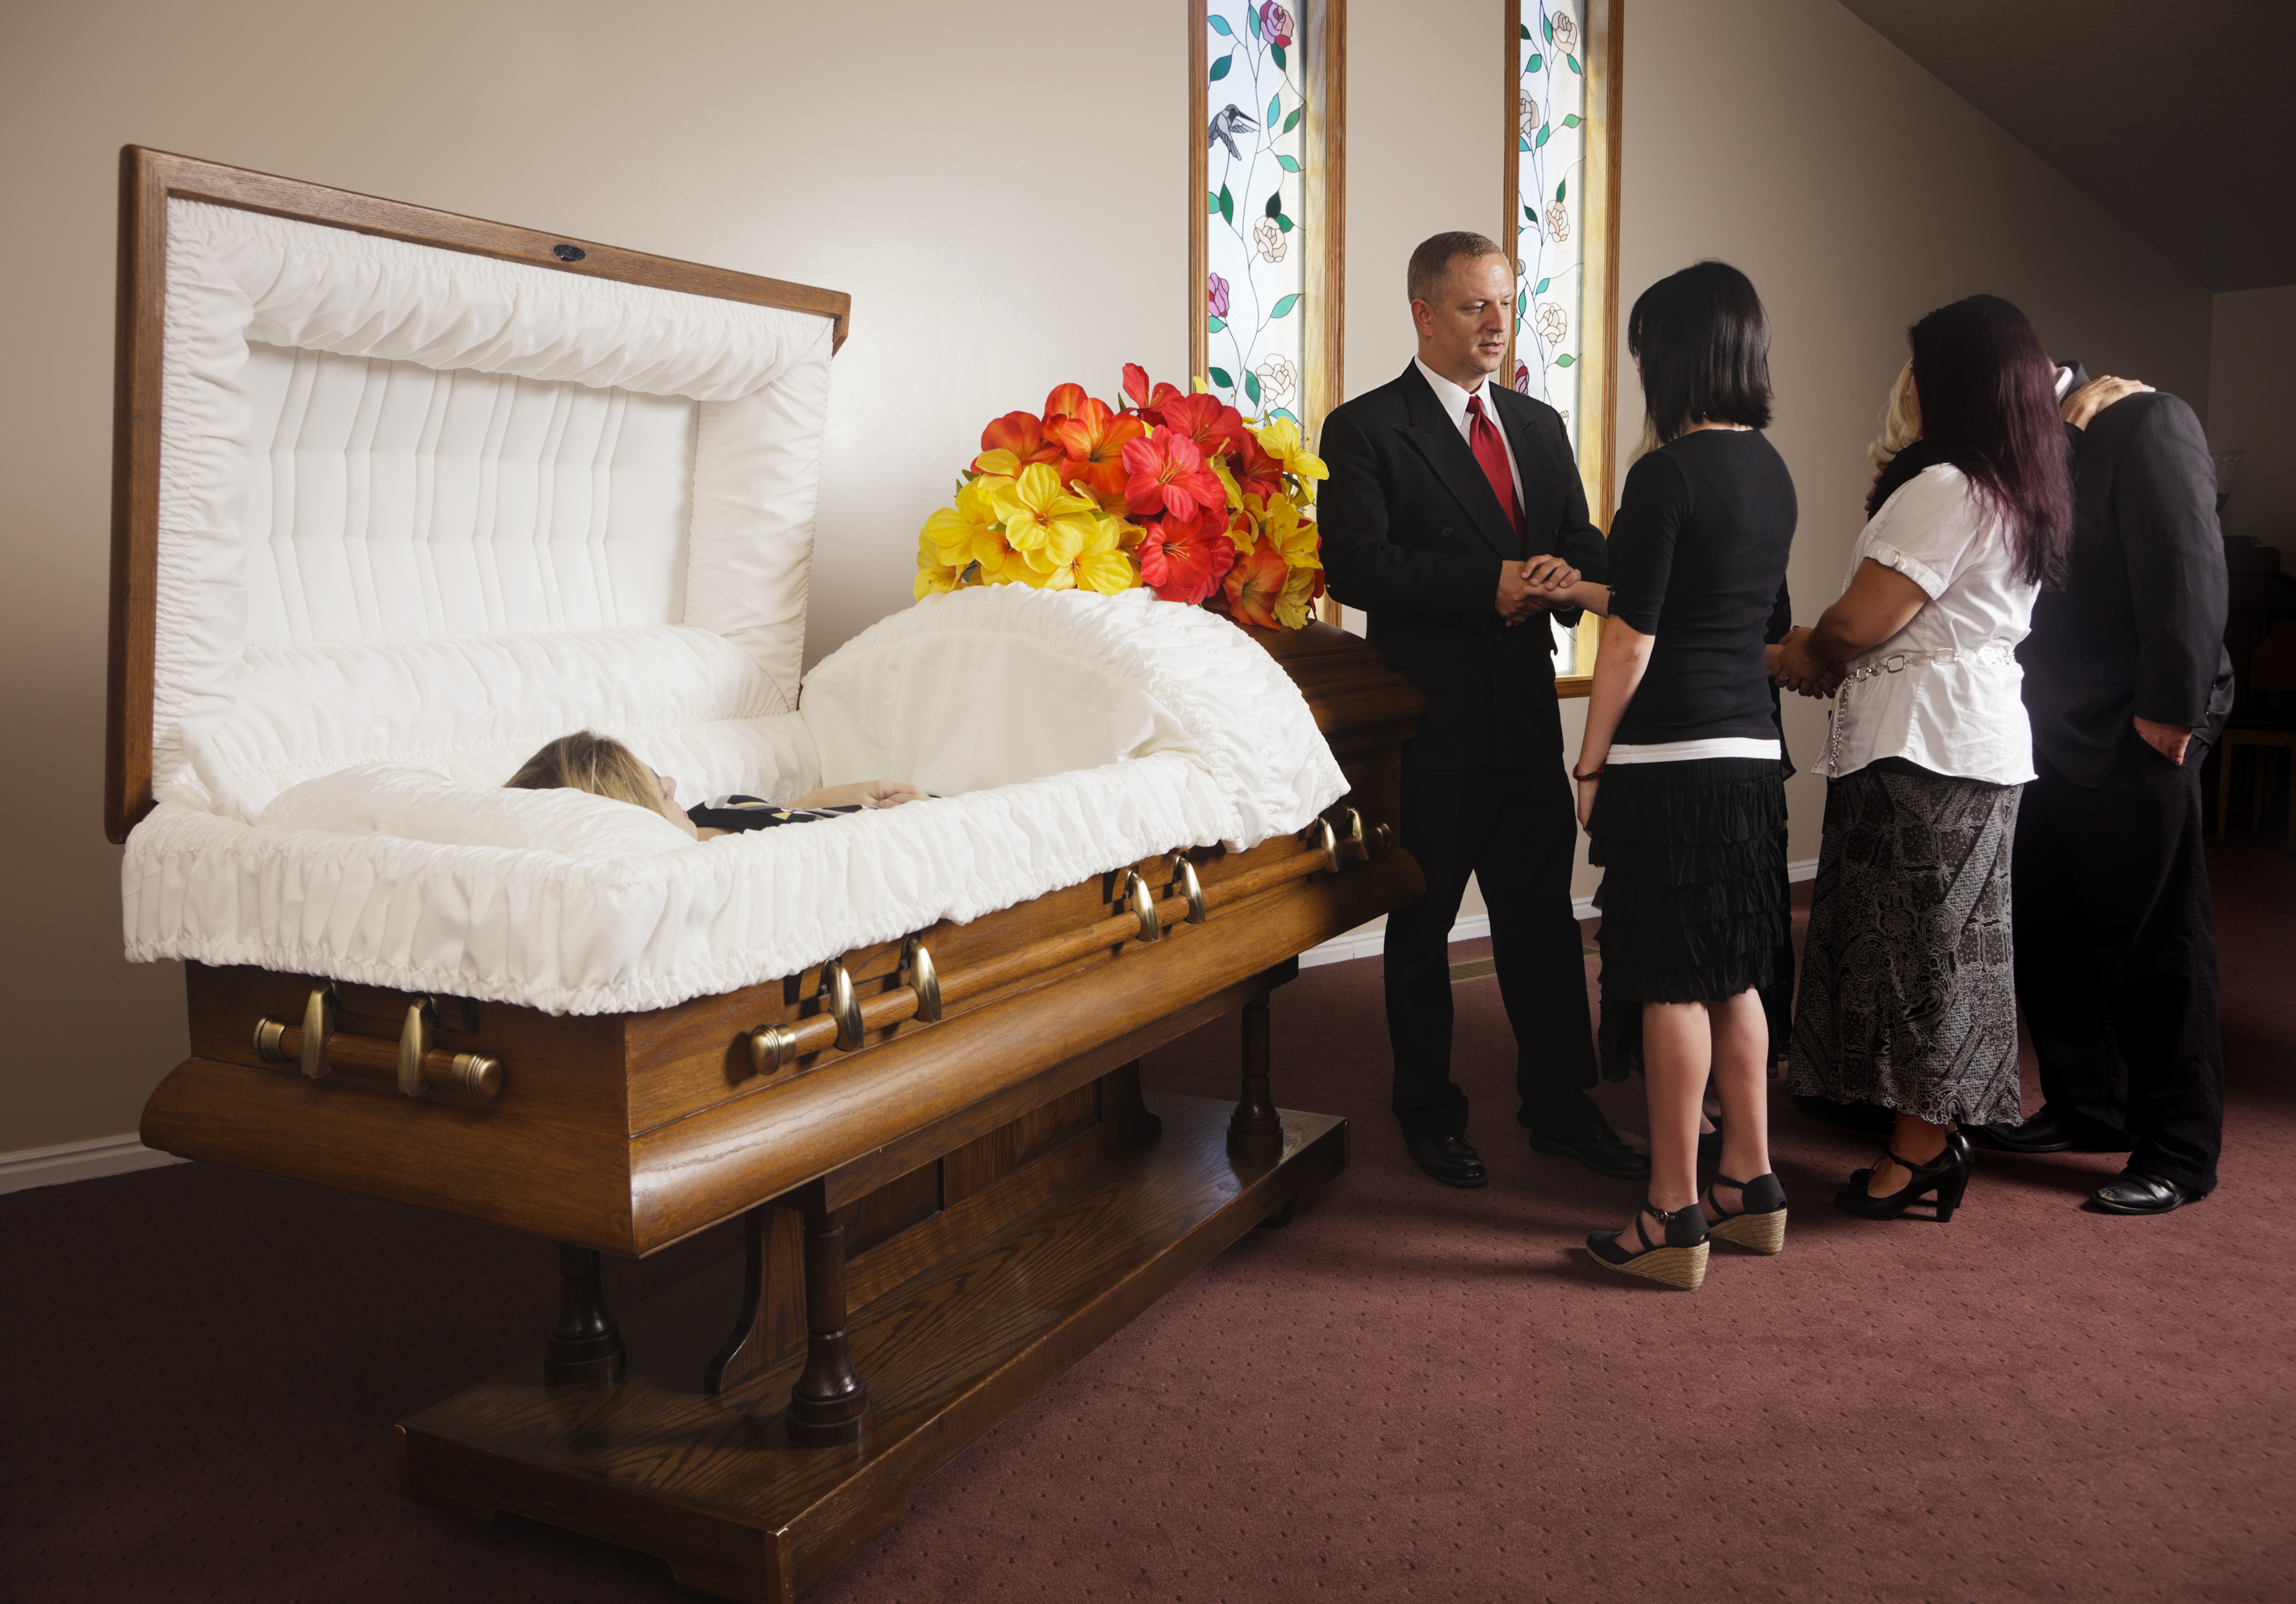 A receiving line of guests next to the casket at a funeral in a funeral hom...